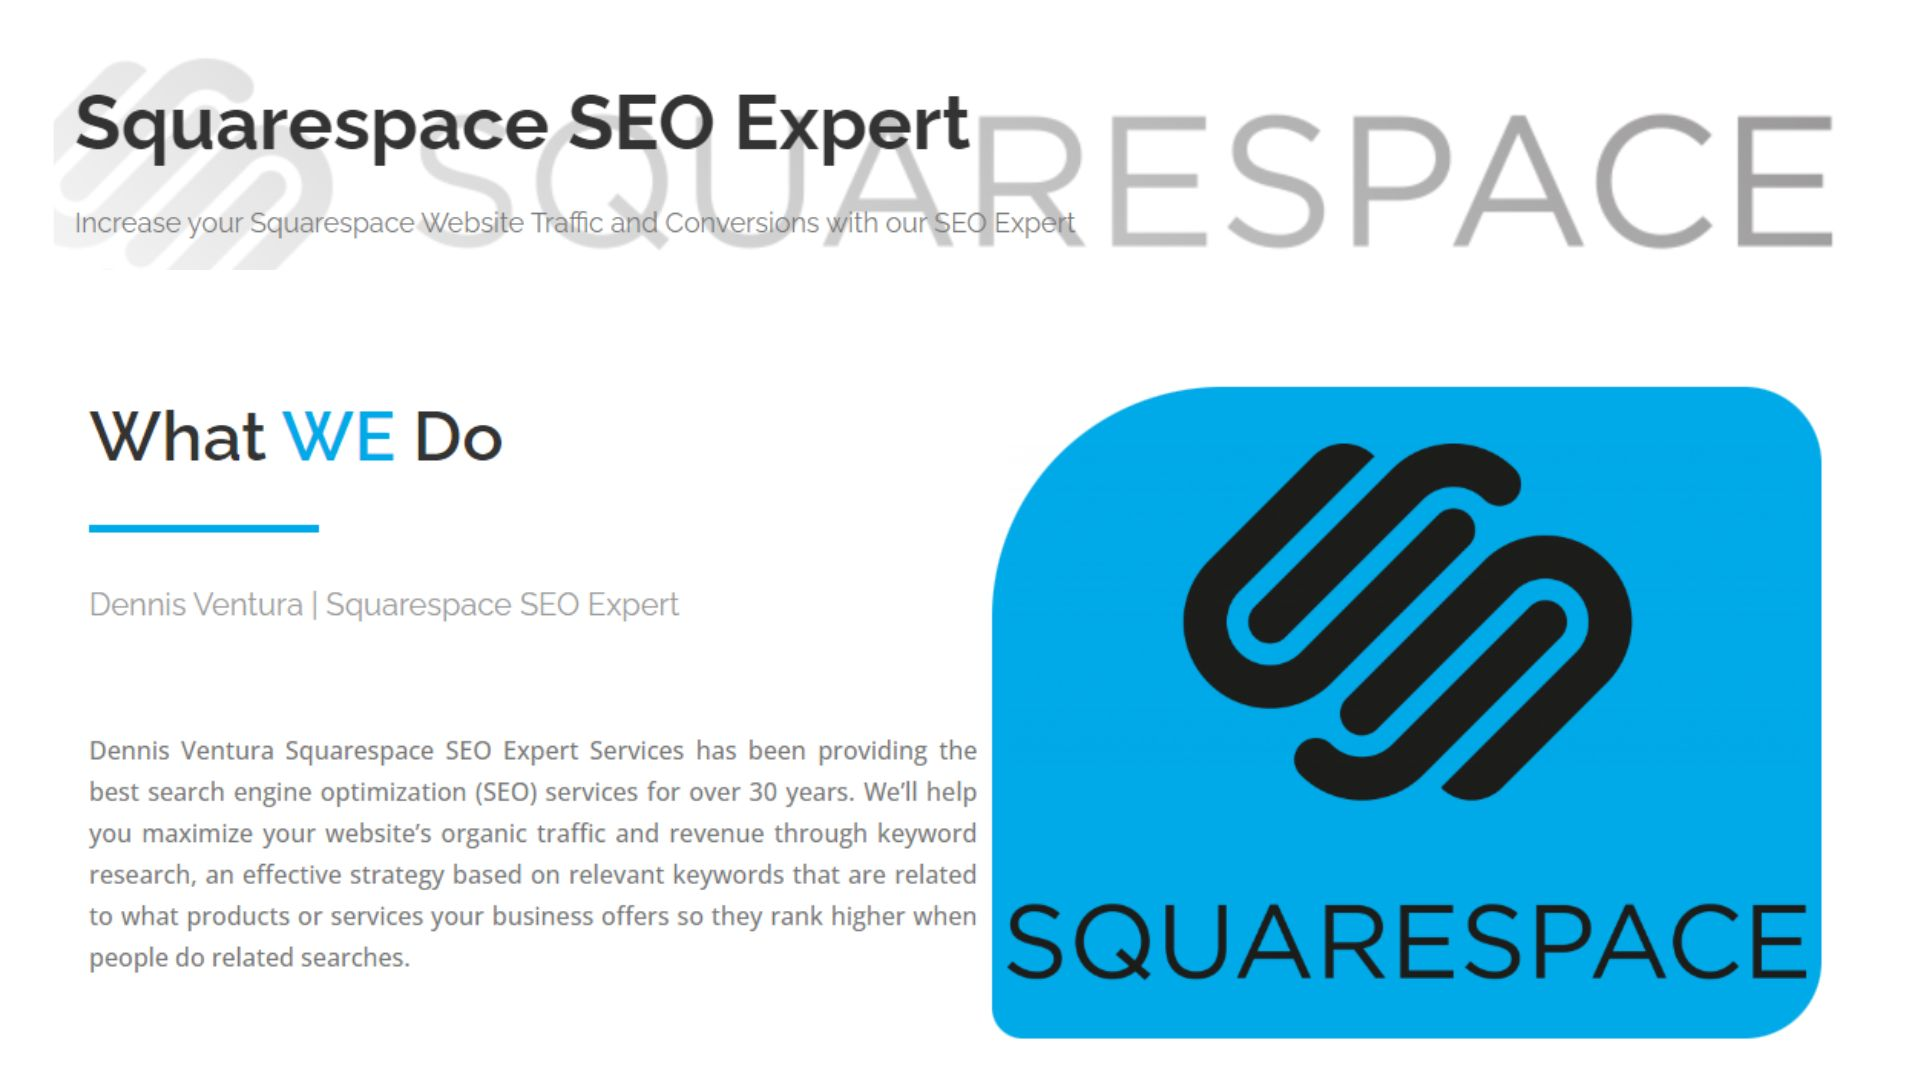 What Are The Specific Services Does The Squarespace SEO Expert Give?